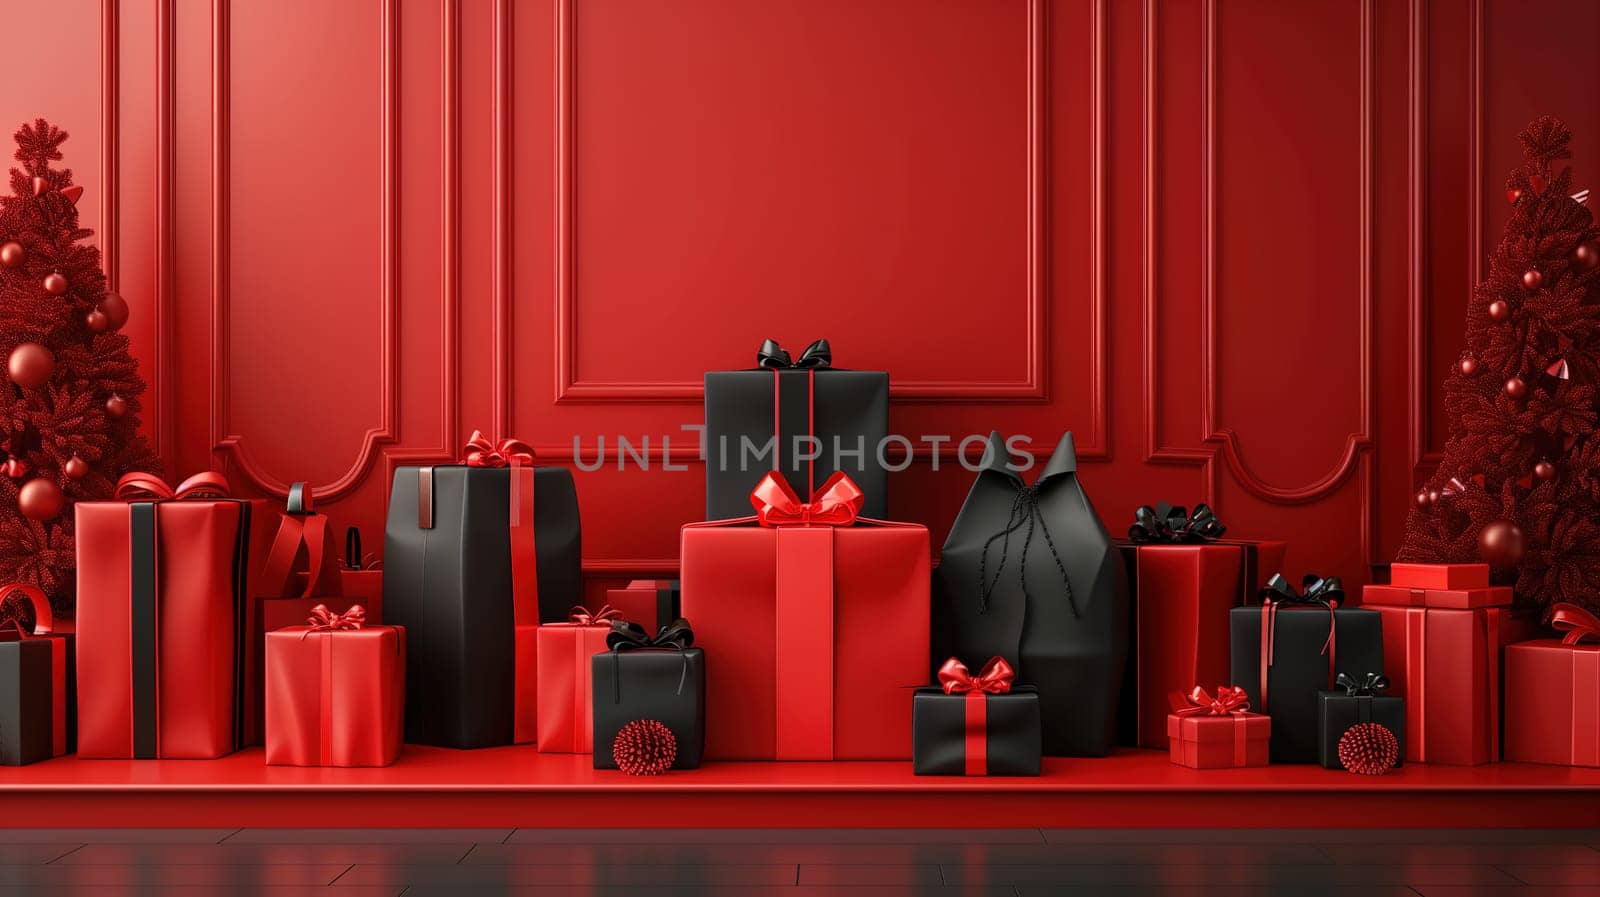 Group of Presents on Red Floor by TRMK